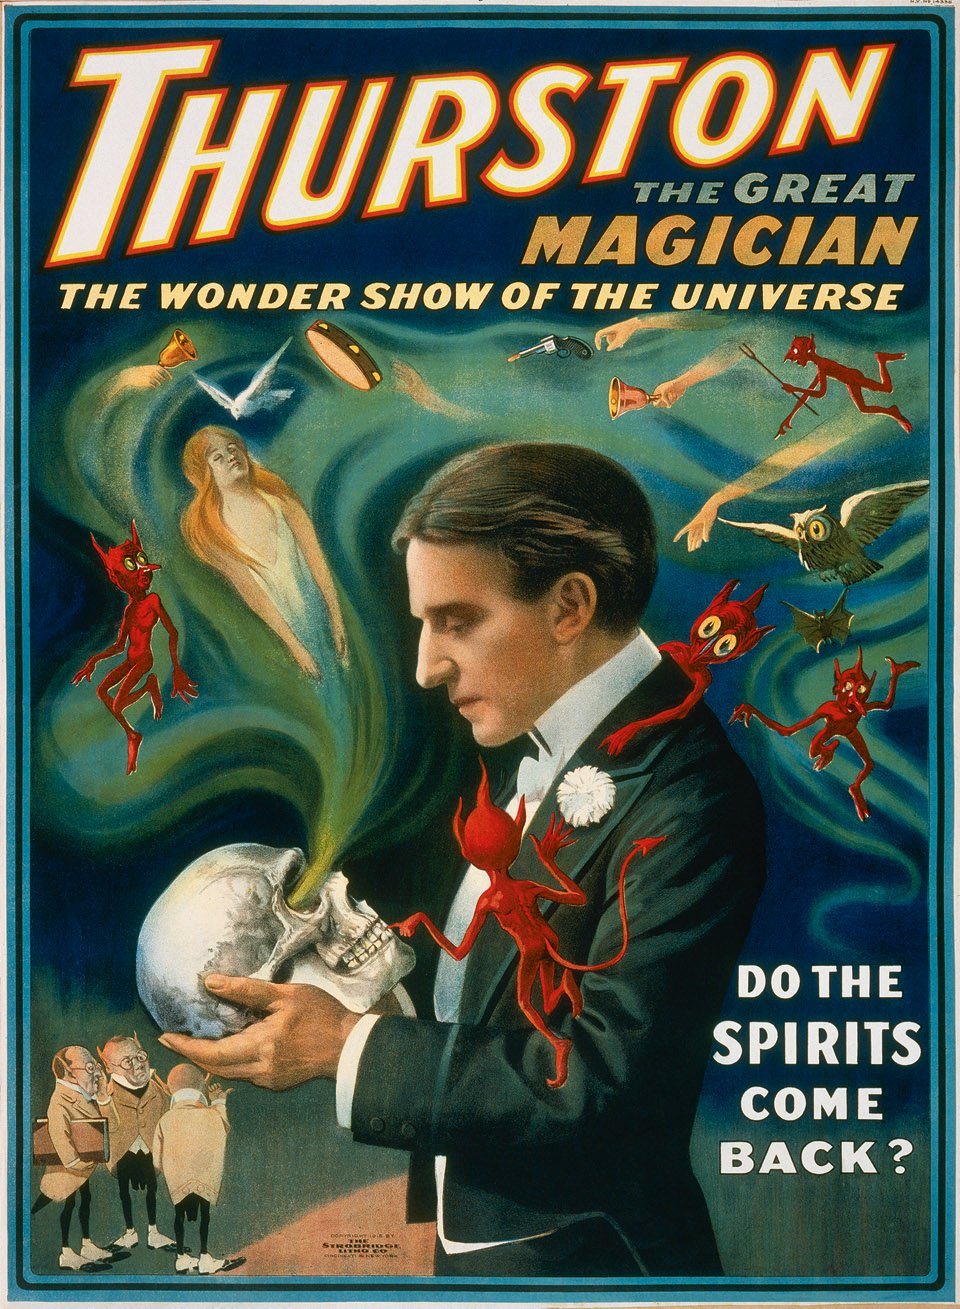 Strobridge Lithograph Co. poster of famous American magician Howard Thurston, 1915. || Copyright: The Library of Congress